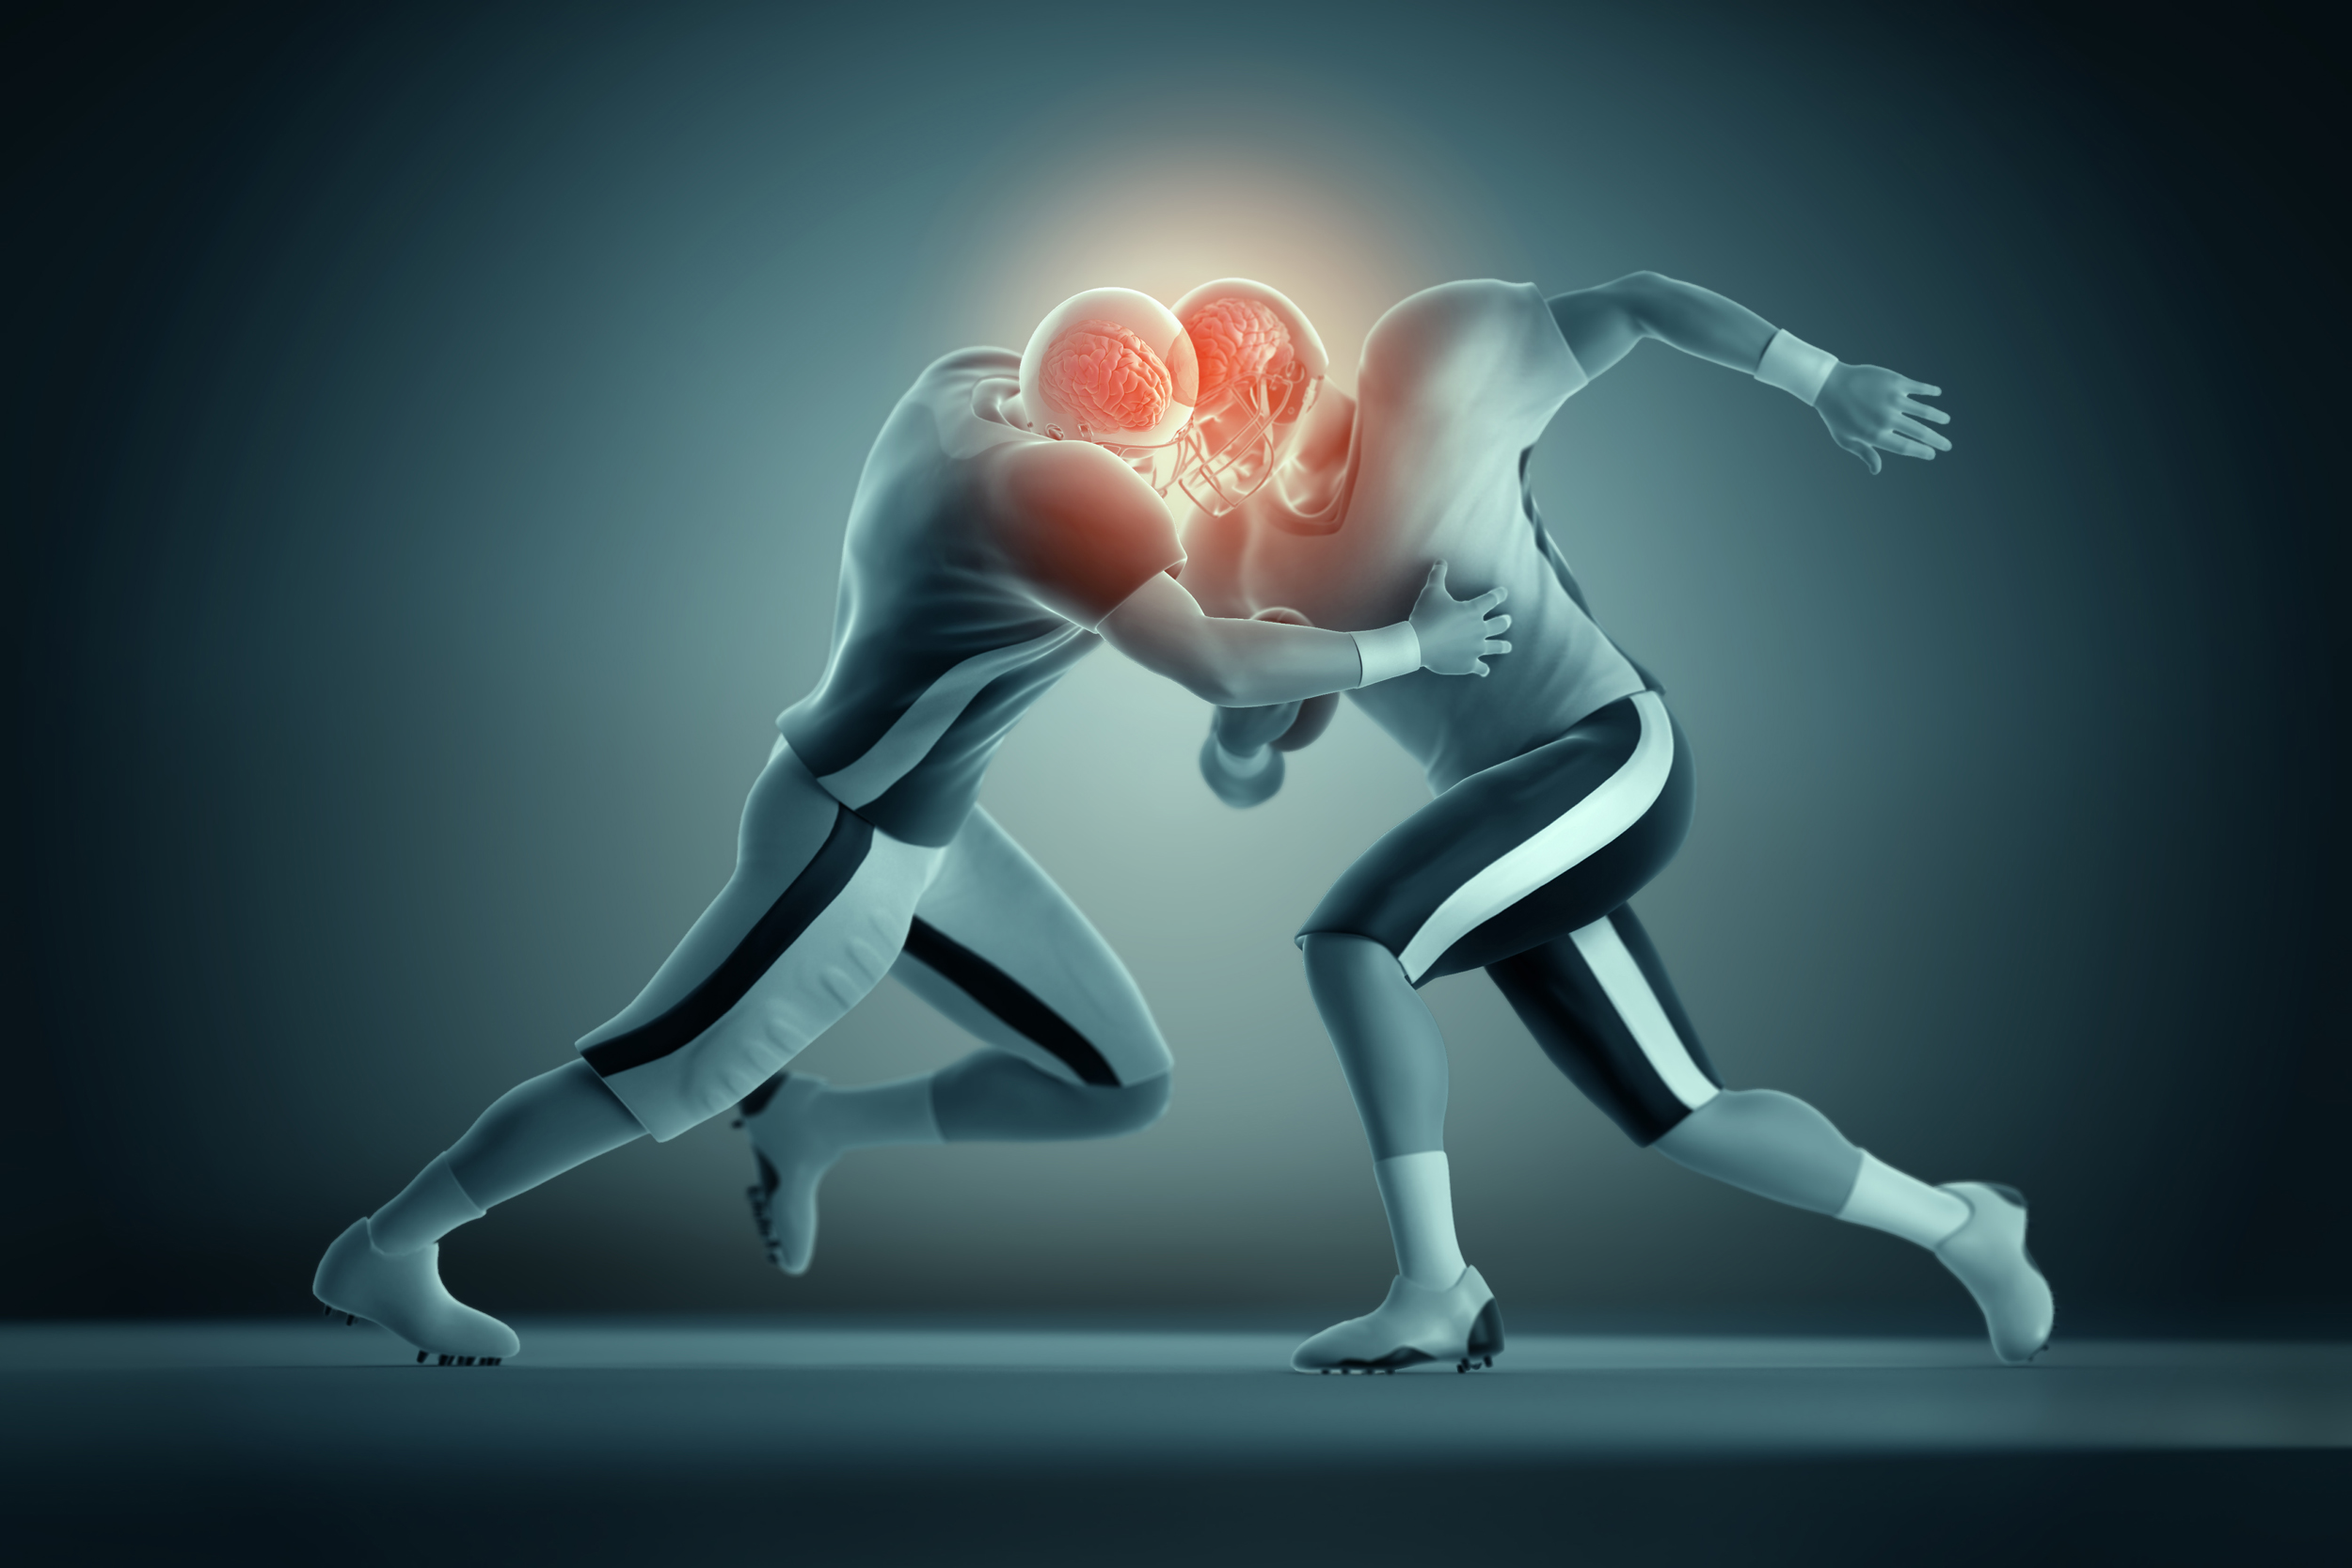 Image of 2 football players making head contact